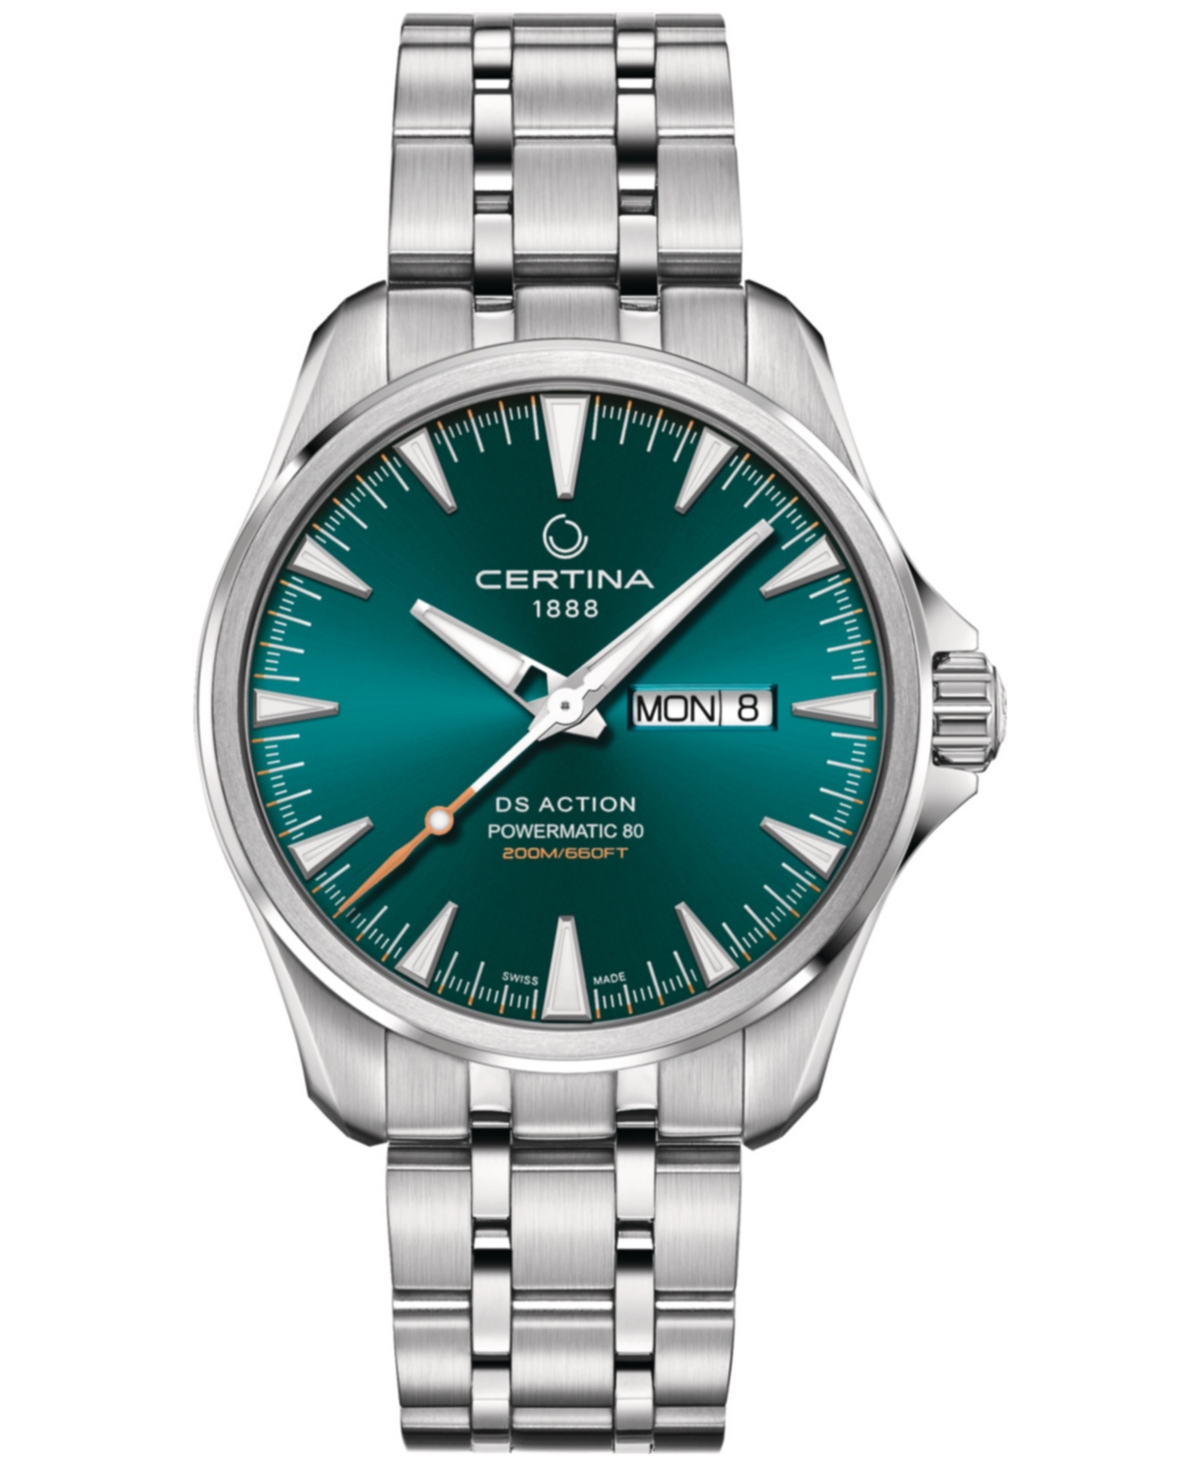 Certina Men's Swiss Automatic Ds Action Stainless Steel Bracelet Watch 41mm In Green